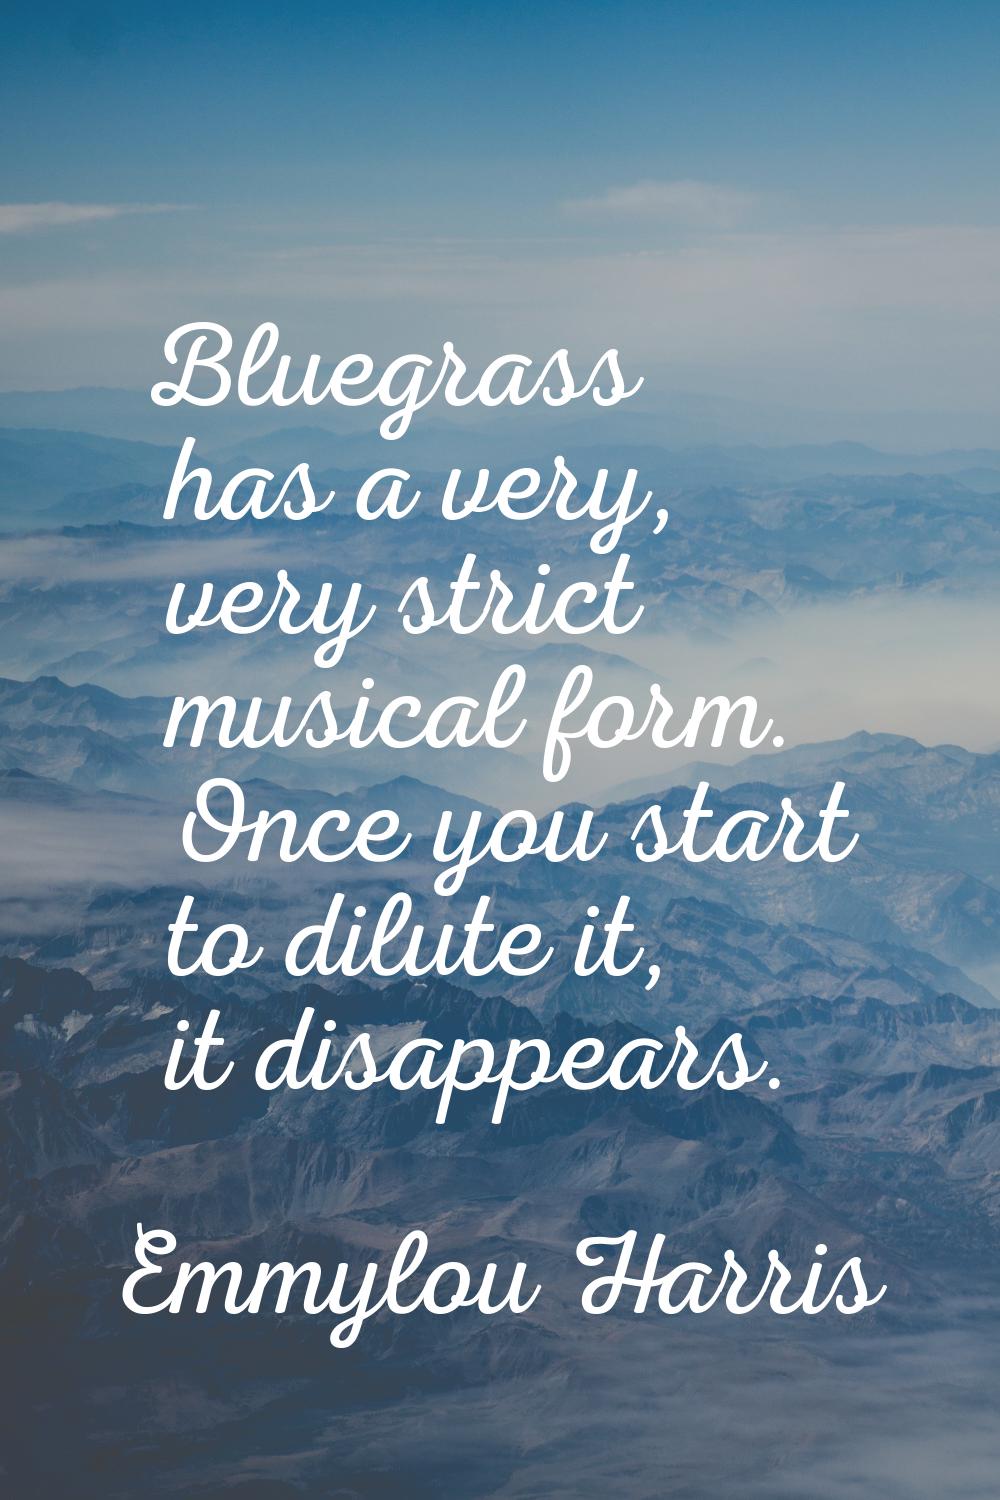 Bluegrass has a very, very strict musical form. Once you start to dilute it, it disappears.